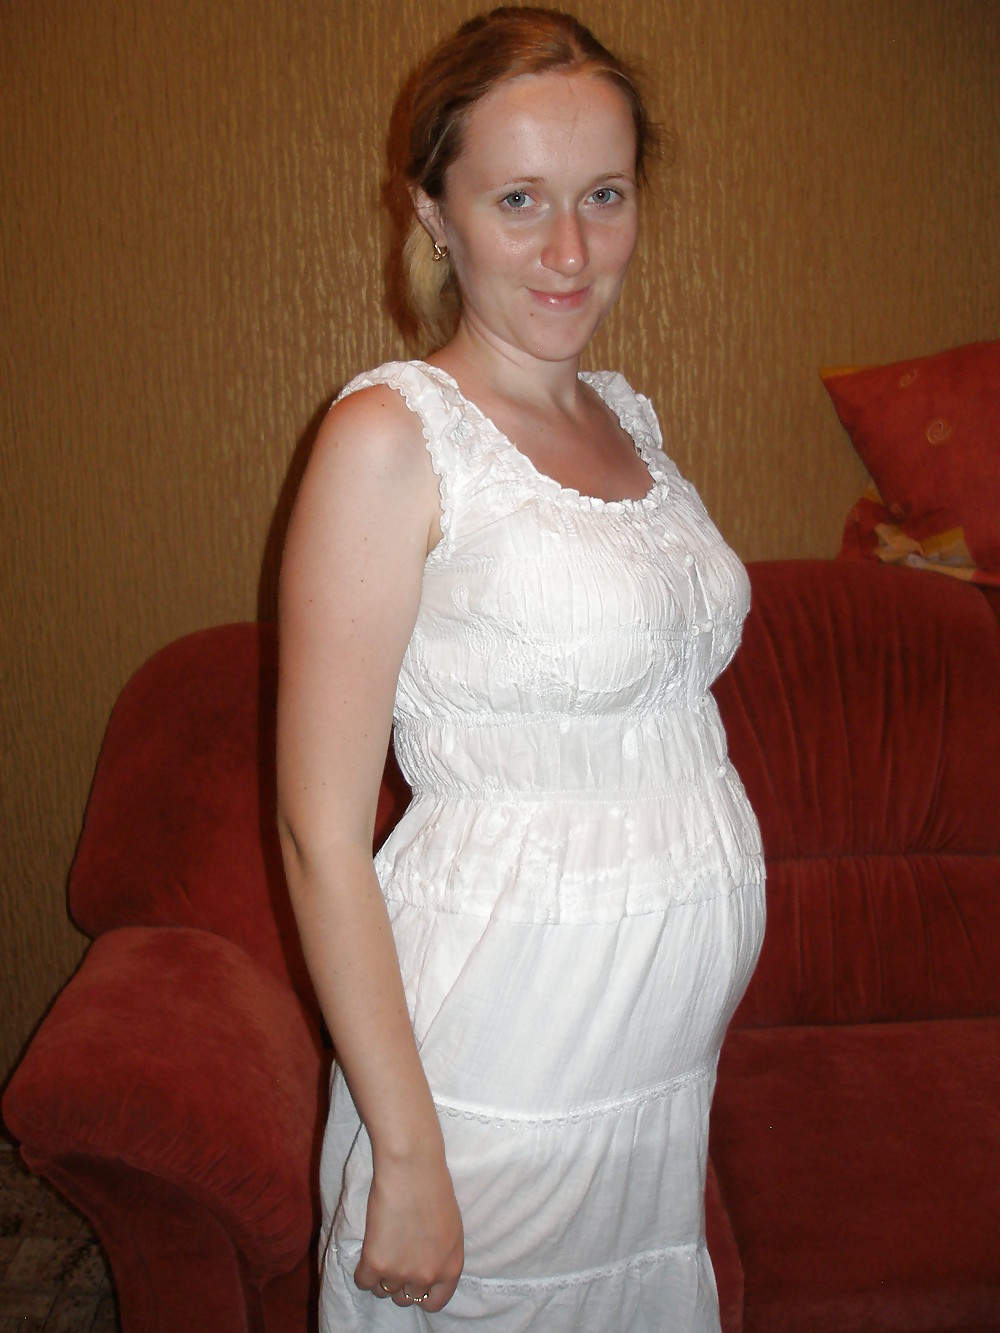 sweet amateur preggo - searching for more pics from her porn pictures